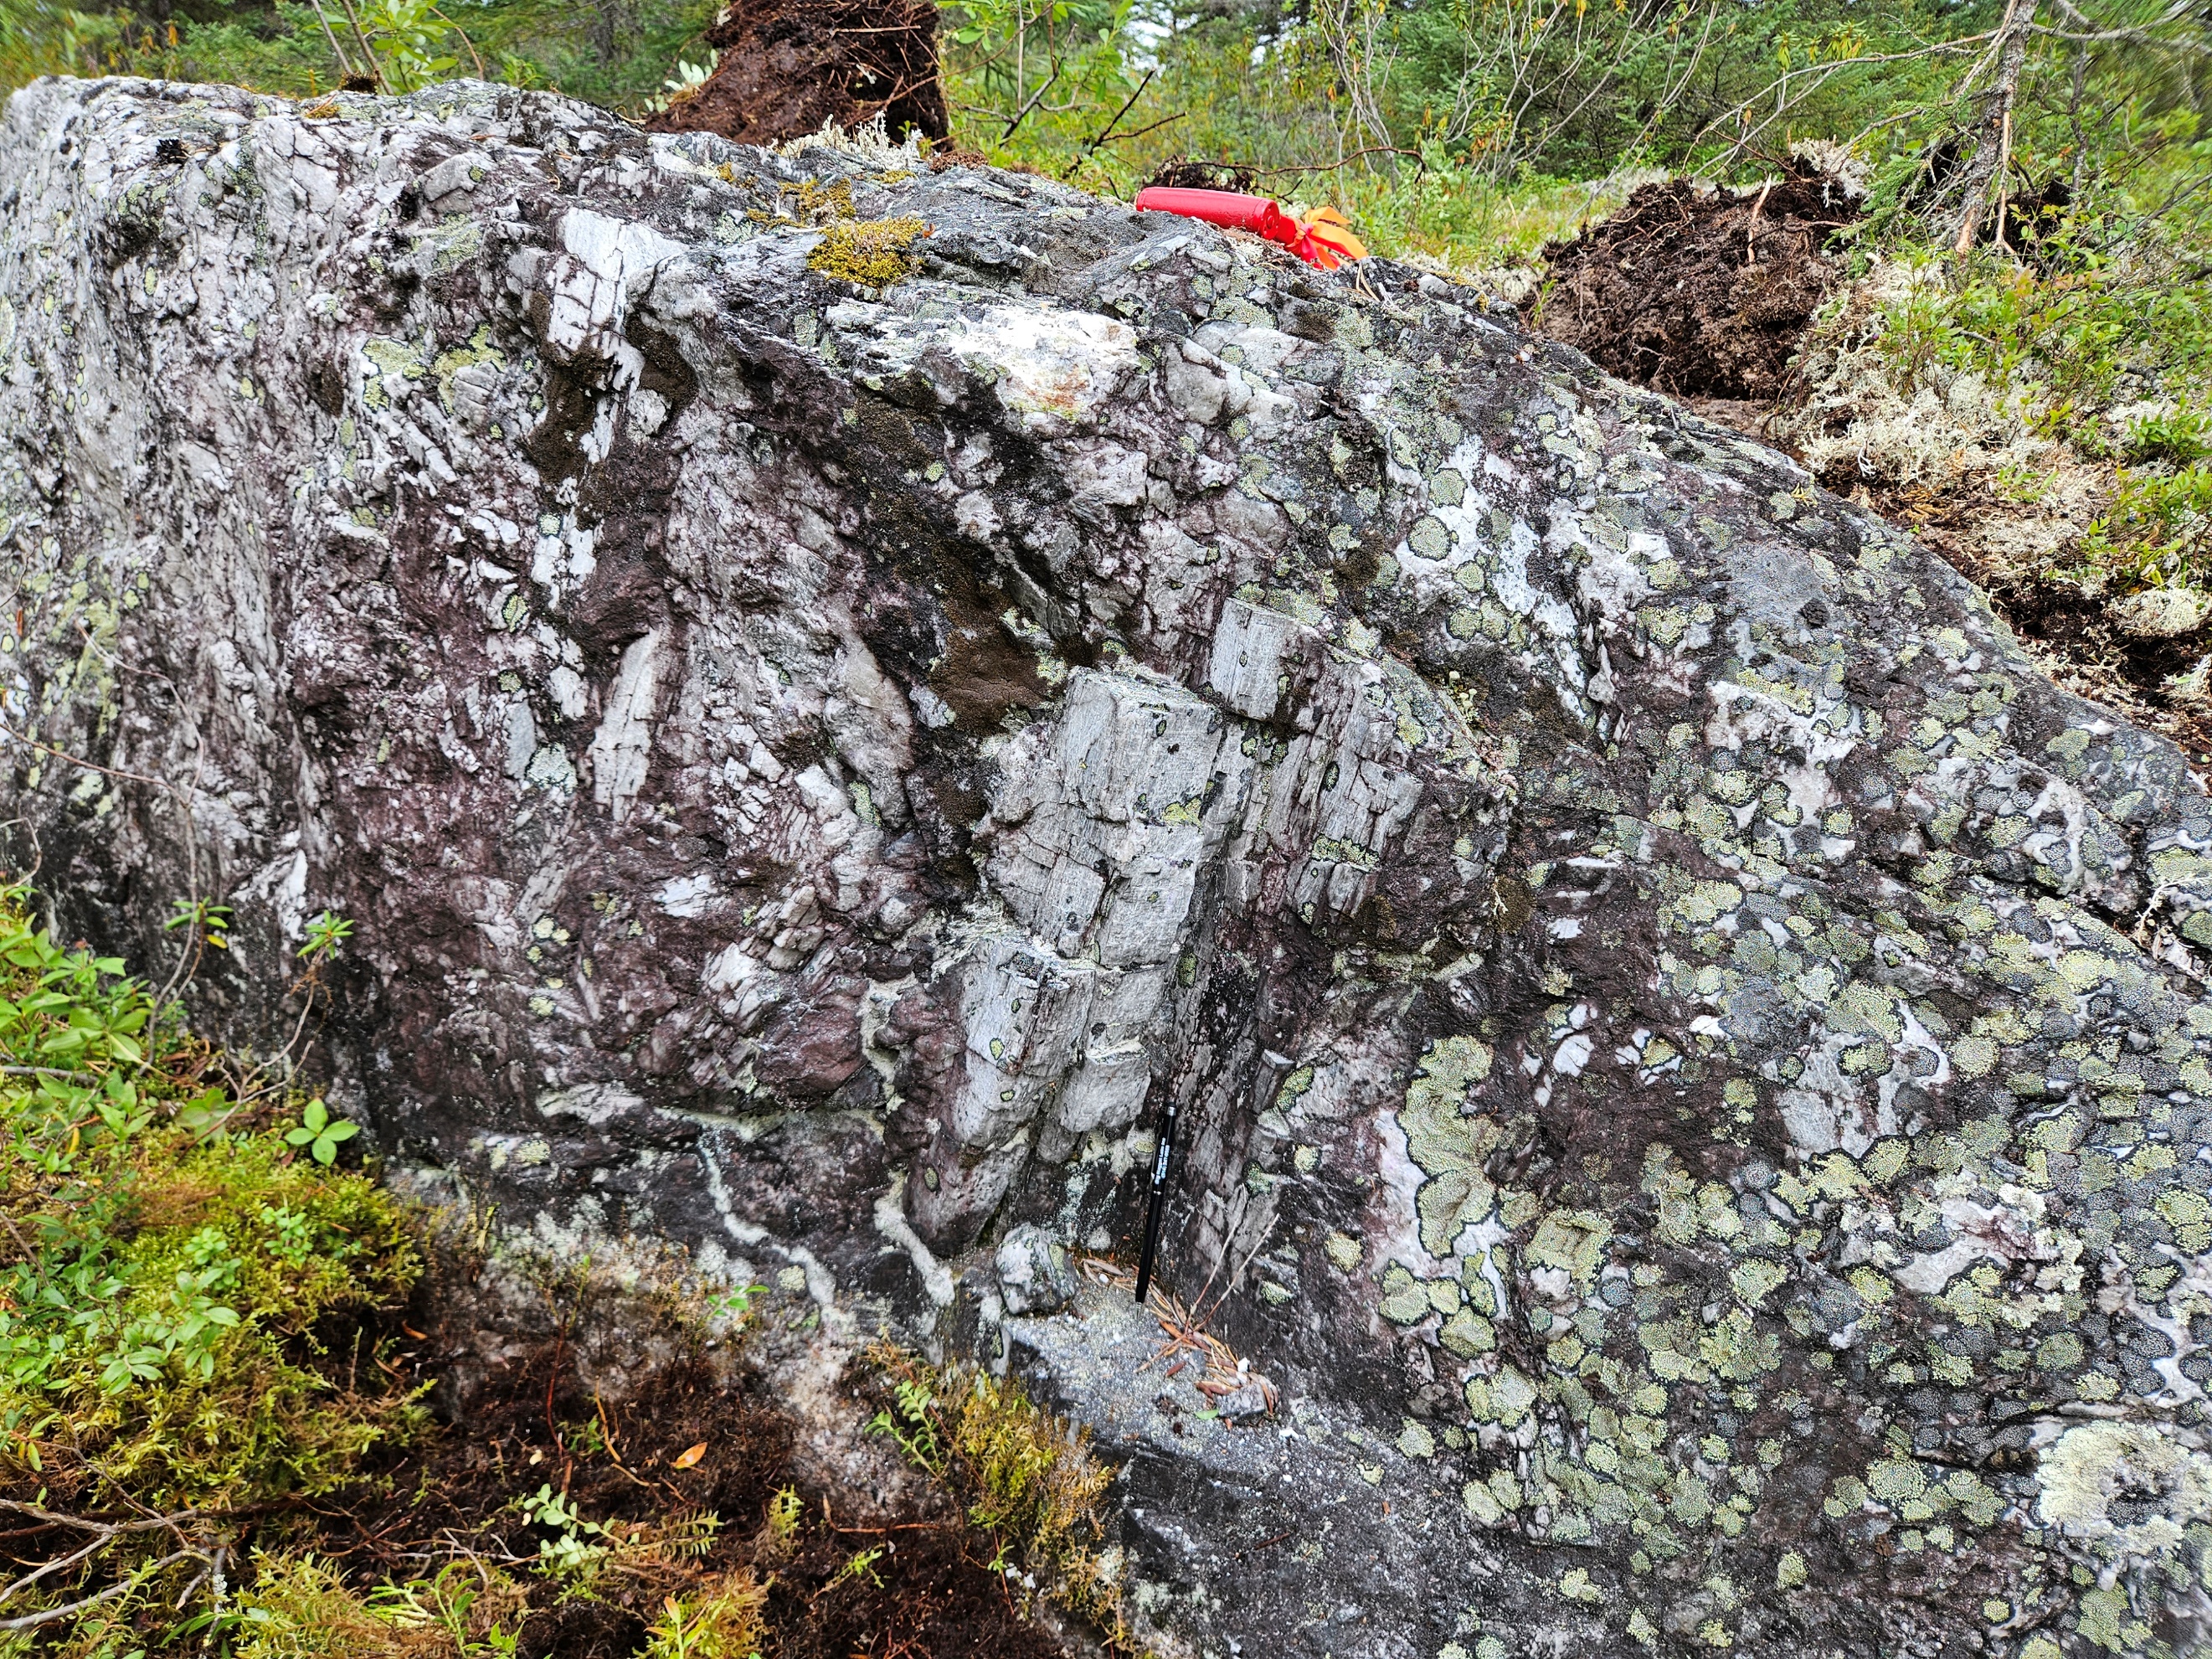 Mineralized outcrop with large prismatic spodumene crystals up to 50cm in length